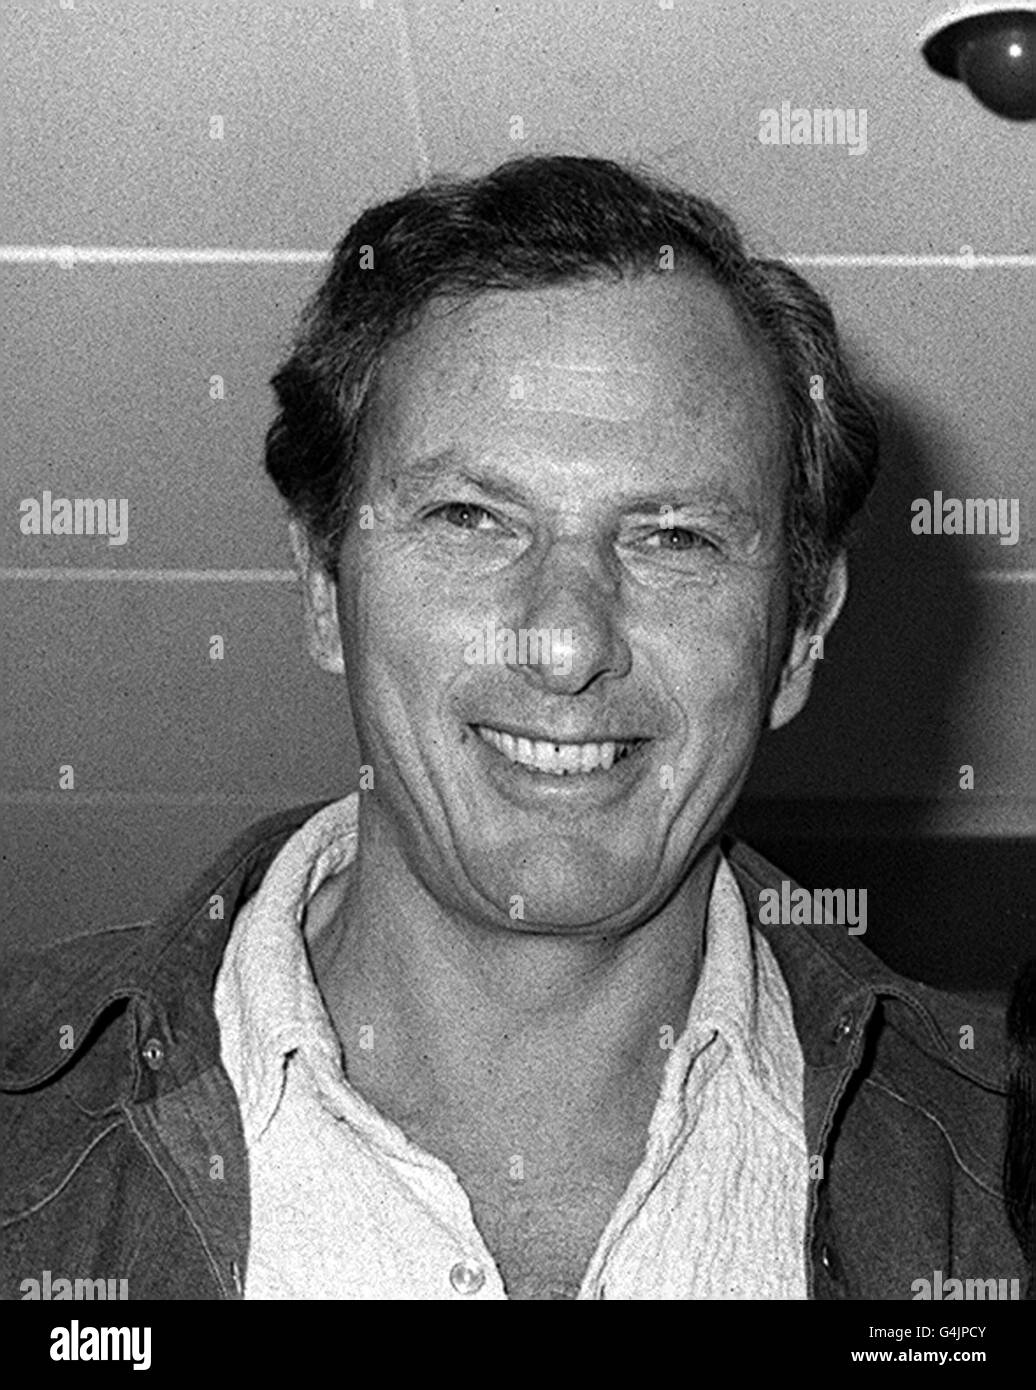 PA NEWS PHOTO 20/4/77 A LIBRARY PICTURE OF CLIFFORD IRVING AT HEATHROW AIRPORT AFTER THEIR ARRIVAL FROM MEXICO Stock Photo